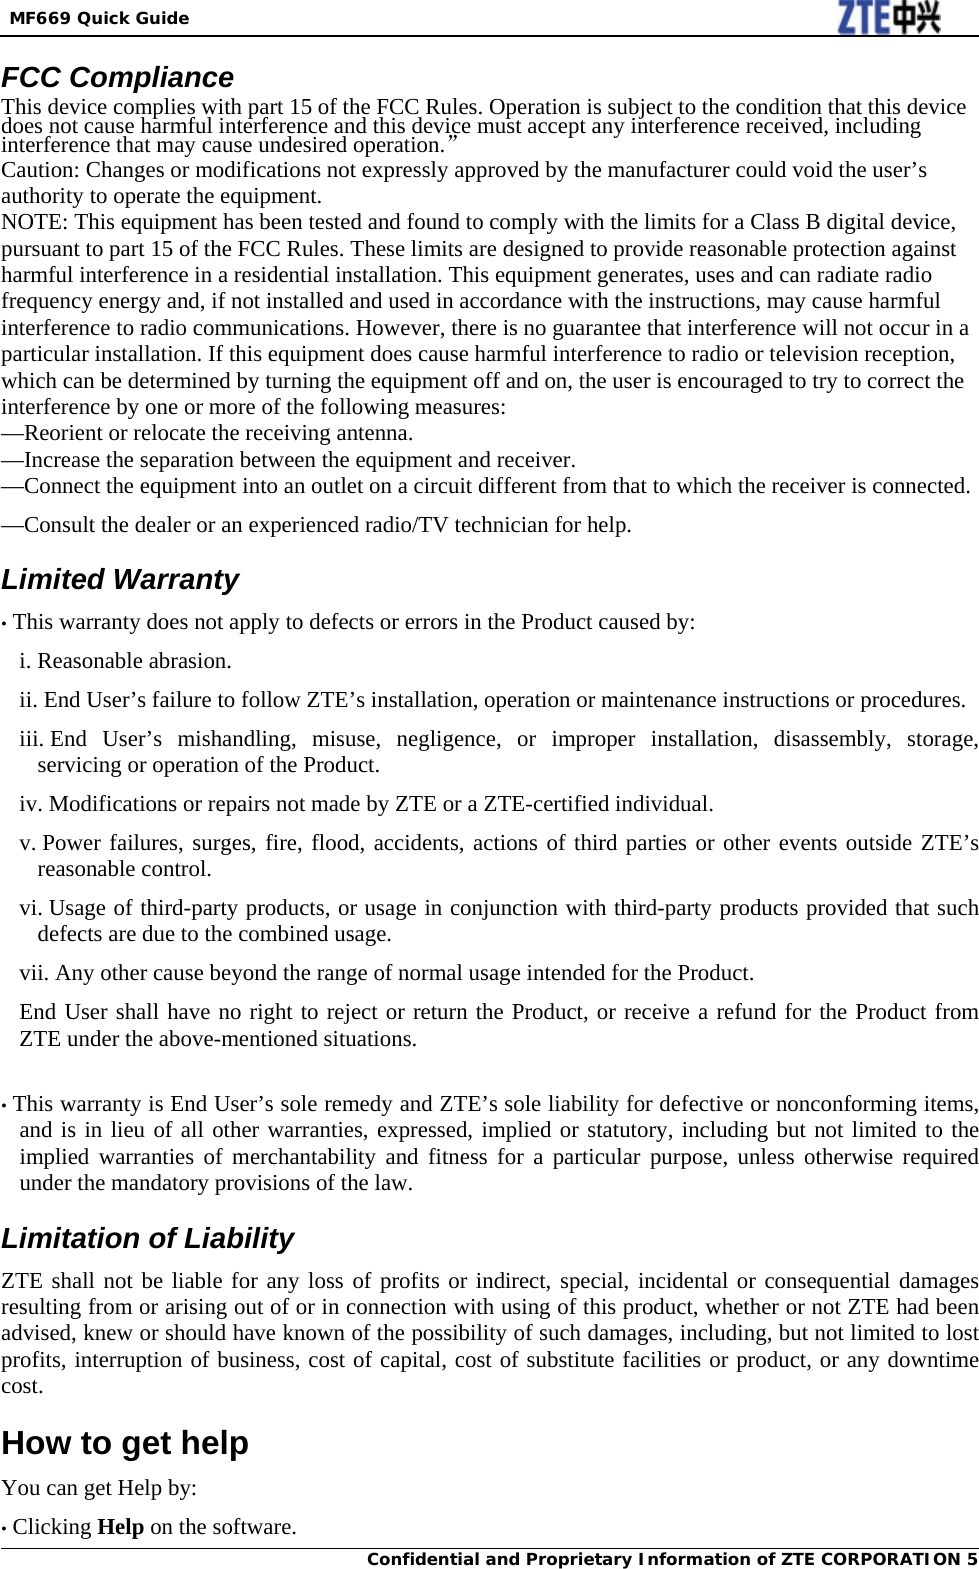  MF669 Quick Guide Confidential and Proprietary Information of ZTE CORPORATION 5FCC Compliance This device complies with part 15 of the FCC Rules. Operation is subject to the condition that this device does not cause harmful interference and this device must accept any interference received, including interference that may cause undesired operation.” Caution: Changes or modifications not expressly approved by the manufacturer could void the user’s authority to operate the equipment. NOTE: This equipment has been tested and found to comply with the limits for a Class B digital device, pursuant to part 15 of the FCC Rules. These limits are designed to provide reasonable protection against harmful interference in a residential installation. This equipment generates, uses and can radiate radio frequency energy and, if not installed and used in accordance with the instructions, may cause harmful interference to radio communications. However, there is no guarantee that interference will not occur in a particular installation. If this equipment does cause harmful interference to radio or television reception, which can be determined by turning the equipment off and on, the user is encouraged to try to correct the interference by one or more of the following measures: —Reorient or relocate the receiving antenna. —Increase the separation between the equipment and receiver. —Connect the equipment into an outlet on a circuit different from that to which the receiver is connected. —Consult the dealer or an experienced radio/TV technician for help. Limited Warranty • This warranty does not apply to defects or errors in the Product caused by: i. Reasonable abrasion. ii. End User’s failure to follow ZTE’s installation, operation or maintenance instructions or procedures. iii. End User’s mishandling, misuse, negligence, or improper installation, disassembly, storage, servicing or operation of the Product. iv. Modifications or repairs not made by ZTE or a ZTE-certified individual. v. Power failures, surges, fire, flood, accidents, actions of third parties or other events outside ZTE’s reasonable control. vi. Usage of third-party products, or usage in conjunction with third-party products provided that such defects are due to the combined usage. vii. Any other cause beyond the range of normal usage intended for the Product. End User shall have no right to reject or return the Product, or receive a refund for the Product from ZTE under the above-mentioned situations.  • This warranty is End User’s sole remedy and ZTE’s sole liability for defective or nonconforming items, and is in lieu of all other warranties, expressed, implied or statutory, including but not limited to the implied warranties of merchantability and fitness for a particular purpose, unless otherwise required under the mandatory provisions of the law. Limitation of Liability ZTE shall not be liable for any loss of profits or indirect, special, incidental or consequential damages resulting from or arising out of or in connection with using of this product, whether or not ZTE had been advised, knew or should have known of the possibility of such damages, including, but not limited to lost profits, interruption of business, cost of capital, cost of substitute facilities or product, or any downtime cost. How to get help You can get Help by: • Clicking Help on the software. 